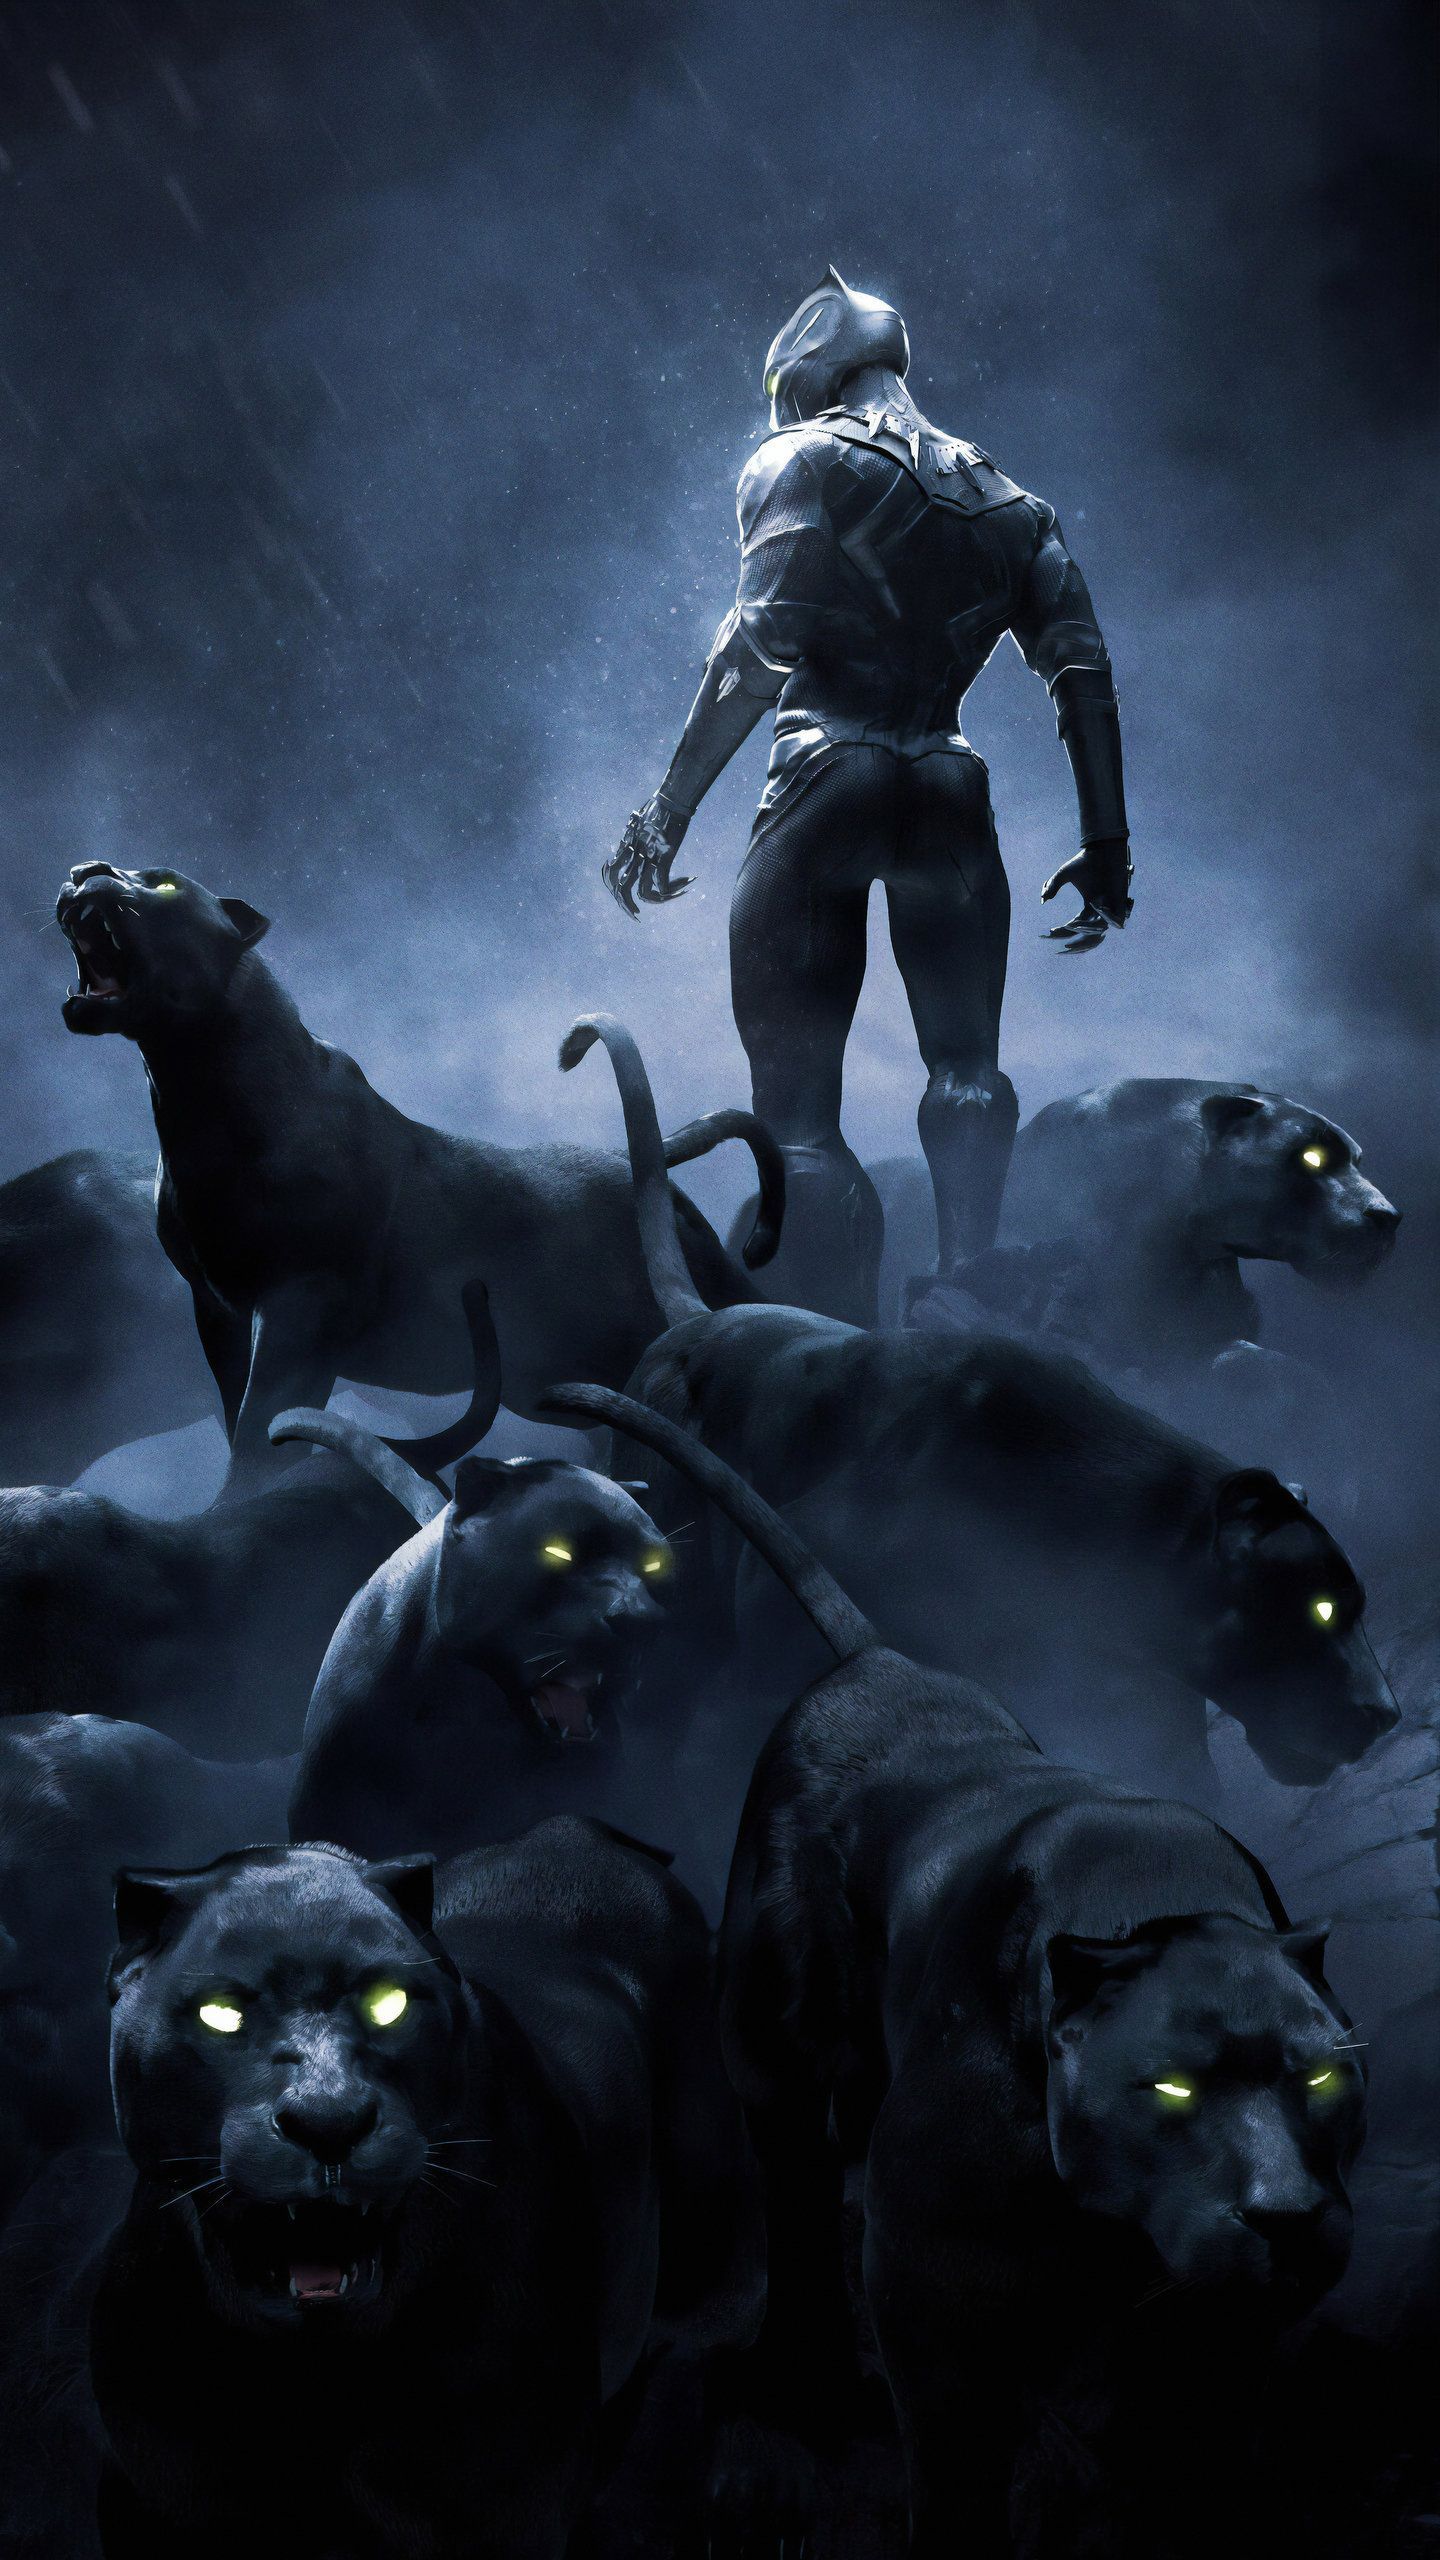 Black Panther Rise UP 4K, HD Superheroes Wallpaper Photo and Picture. Black panther marvel, Black panther art, Marvel comics wallpaper